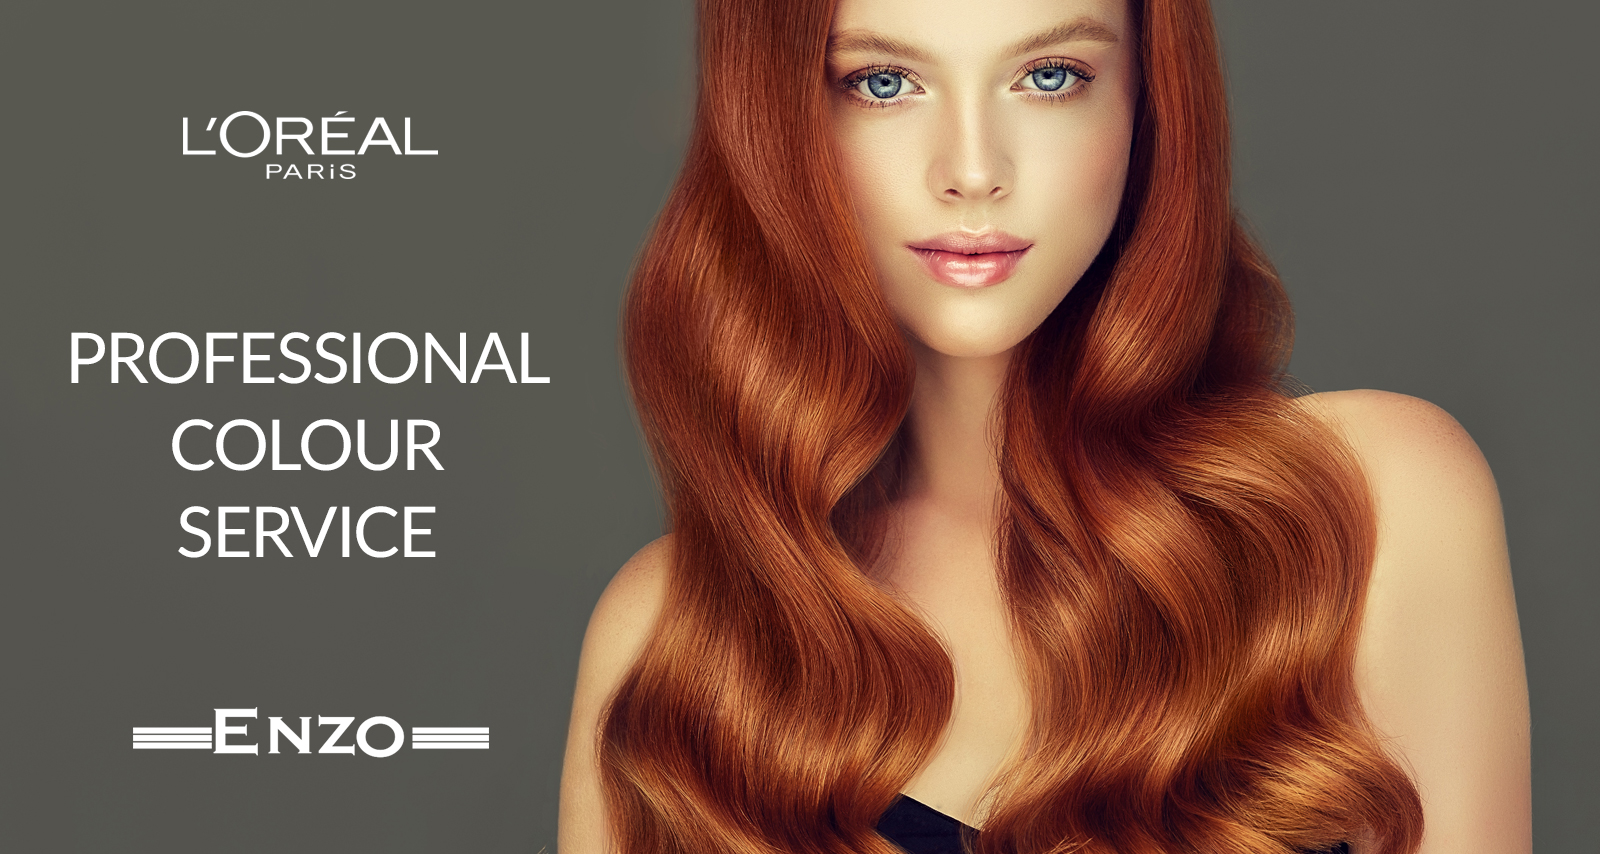 L'Oreal Professional Colouring Enzo Aesthetic - The best facials treatments  in west London